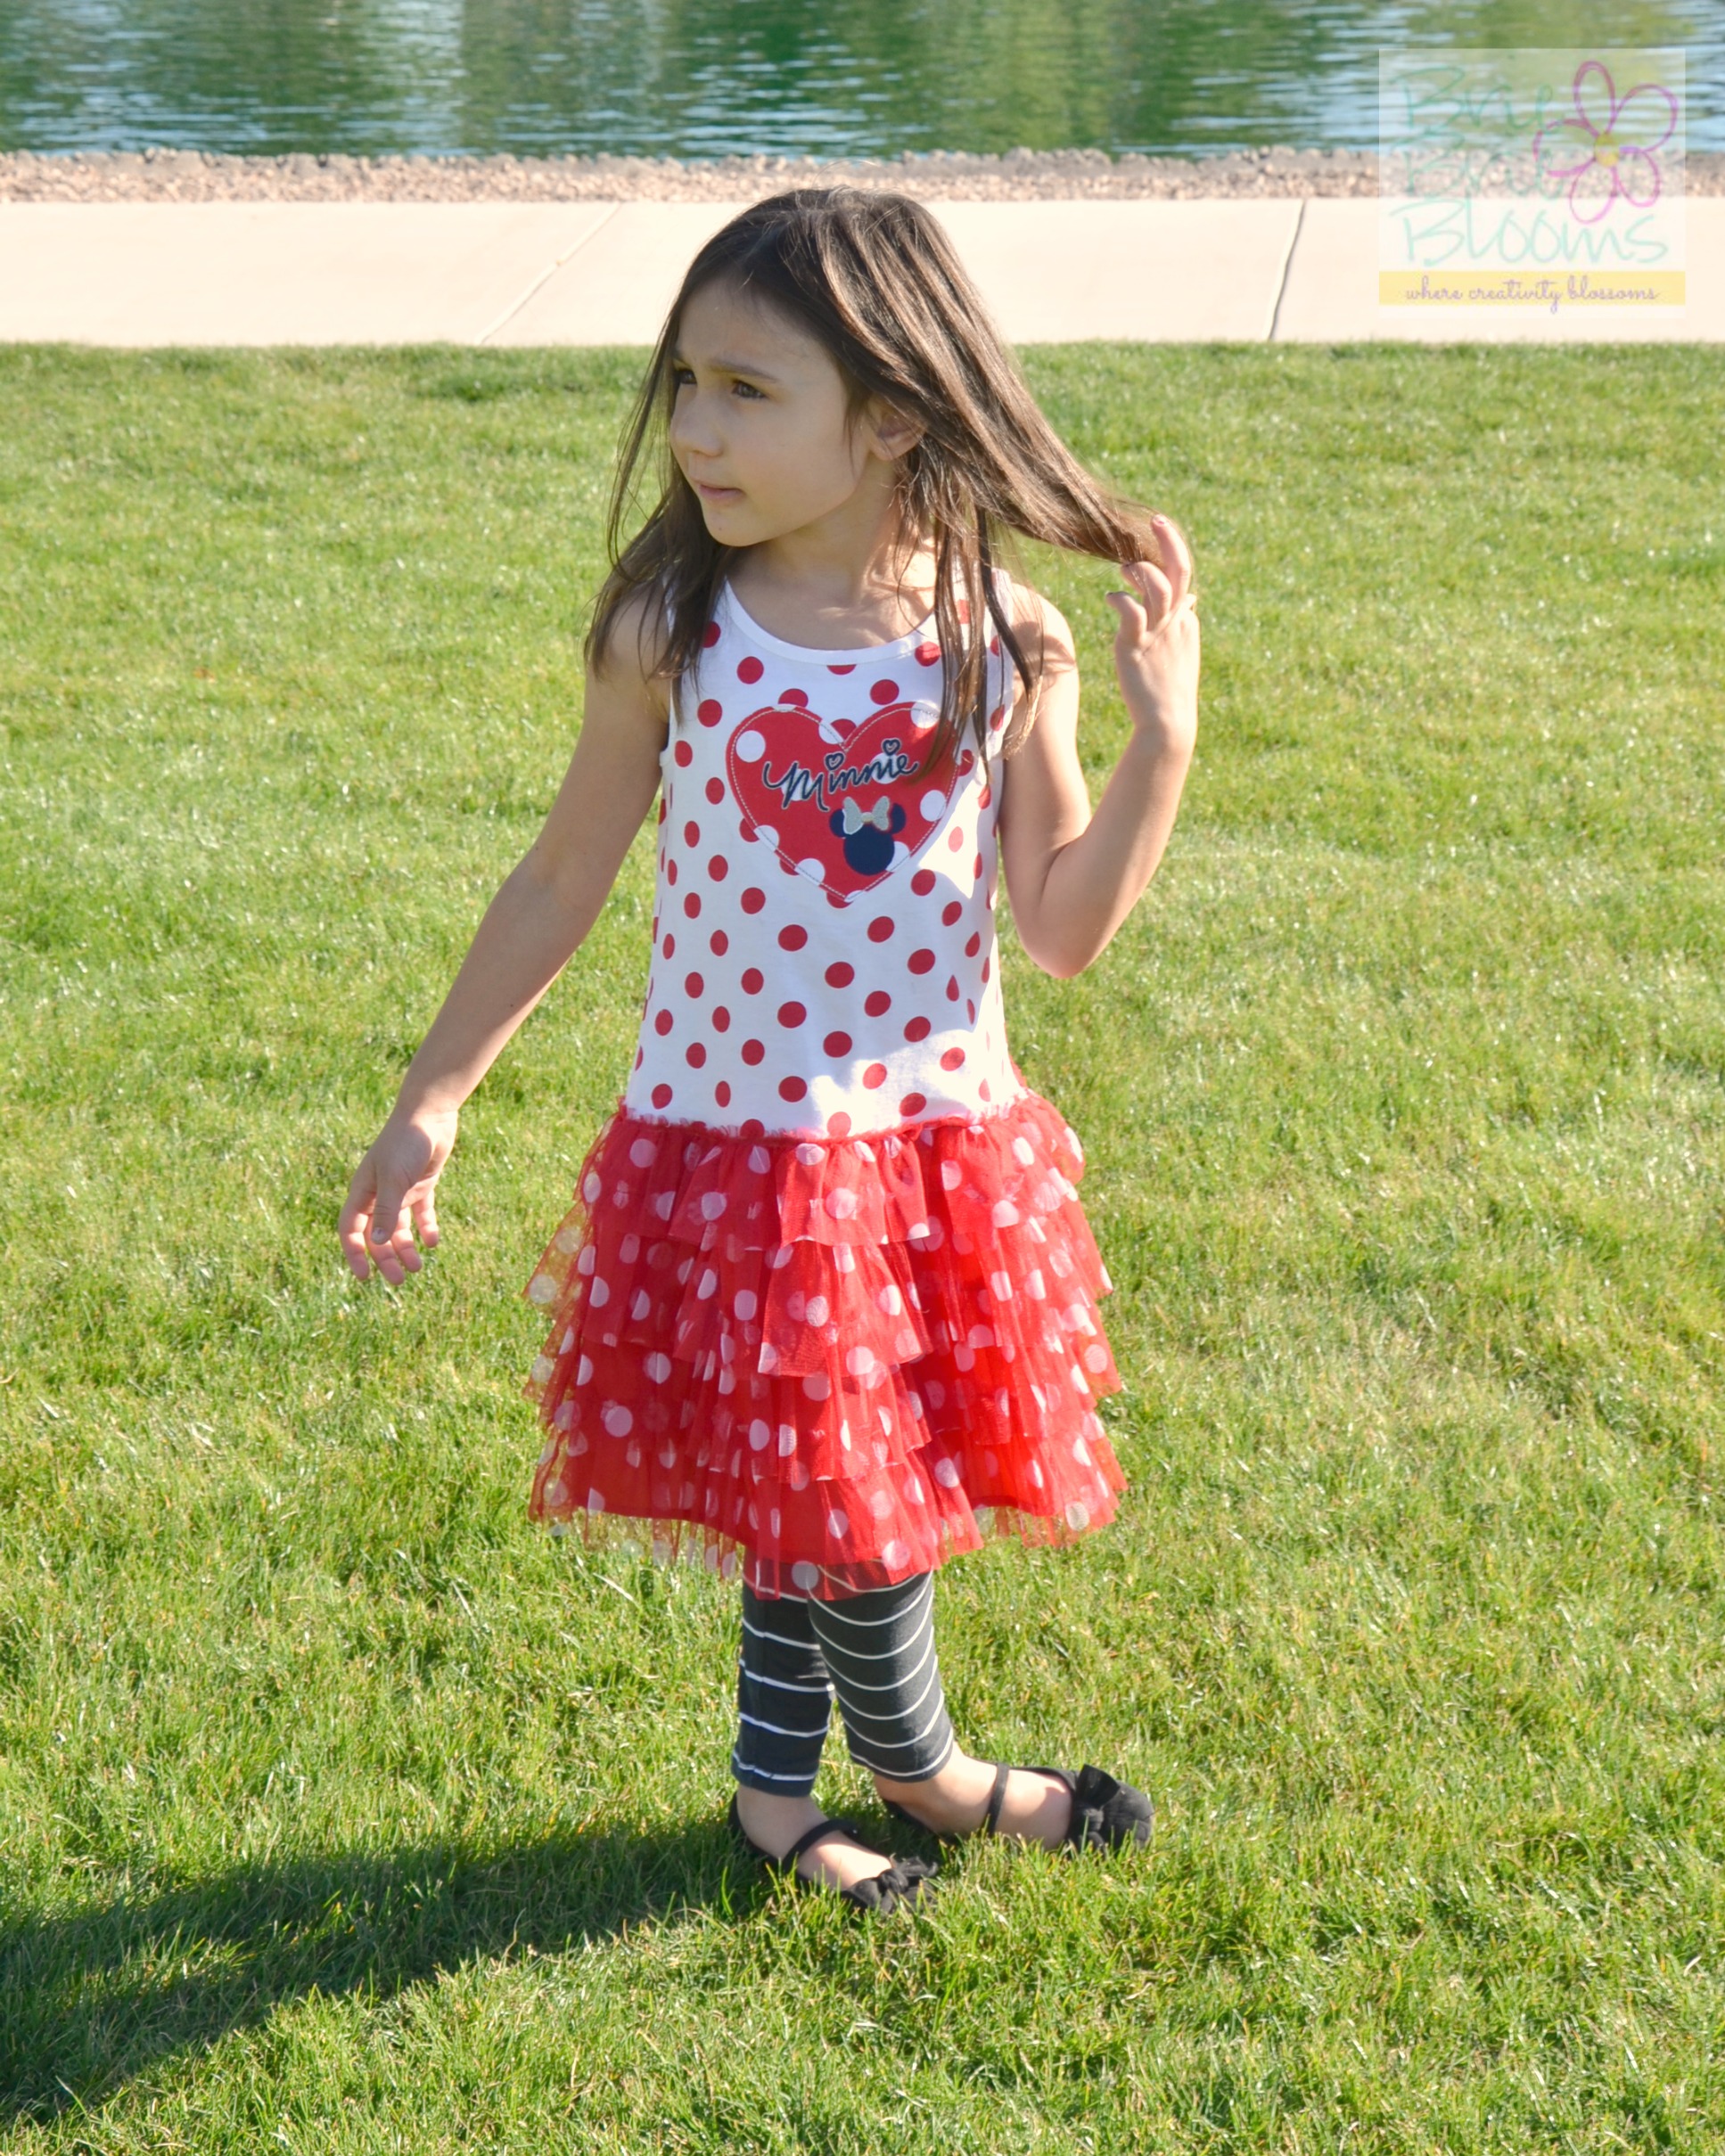 playing-at-the-park-in-new-dress